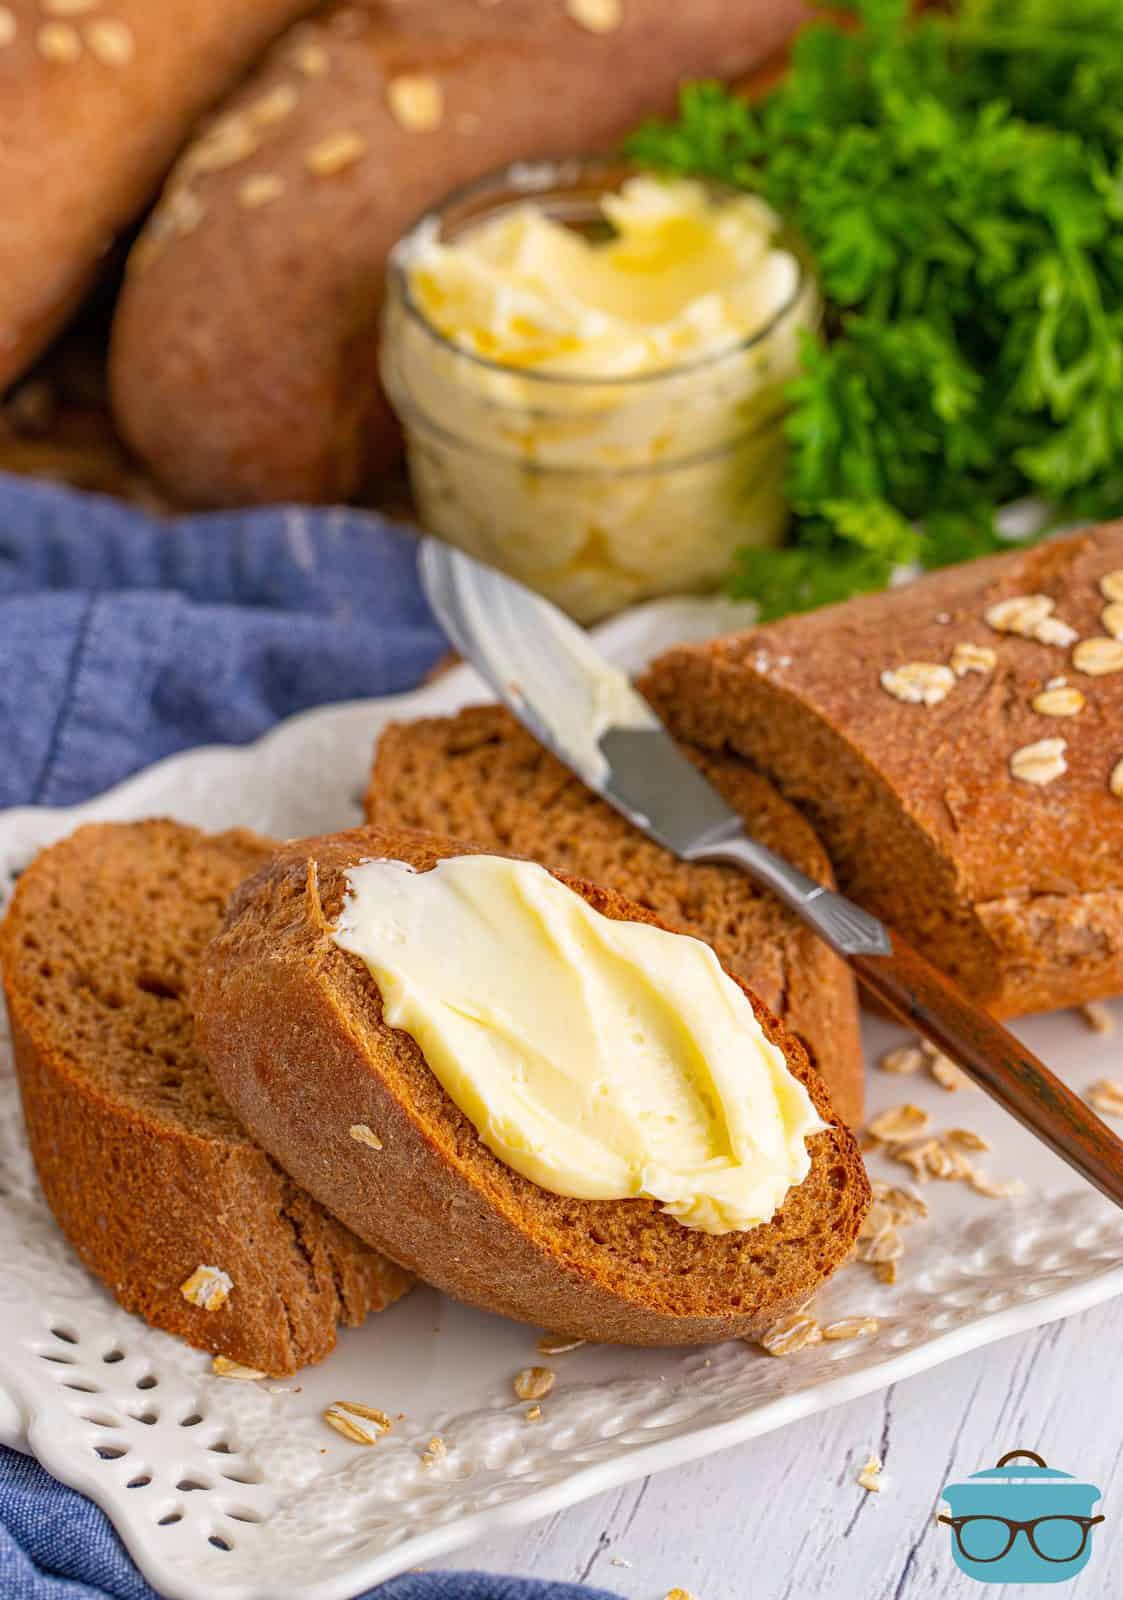 Butter spread on slice of Cheesecake Factory Brown Bread.